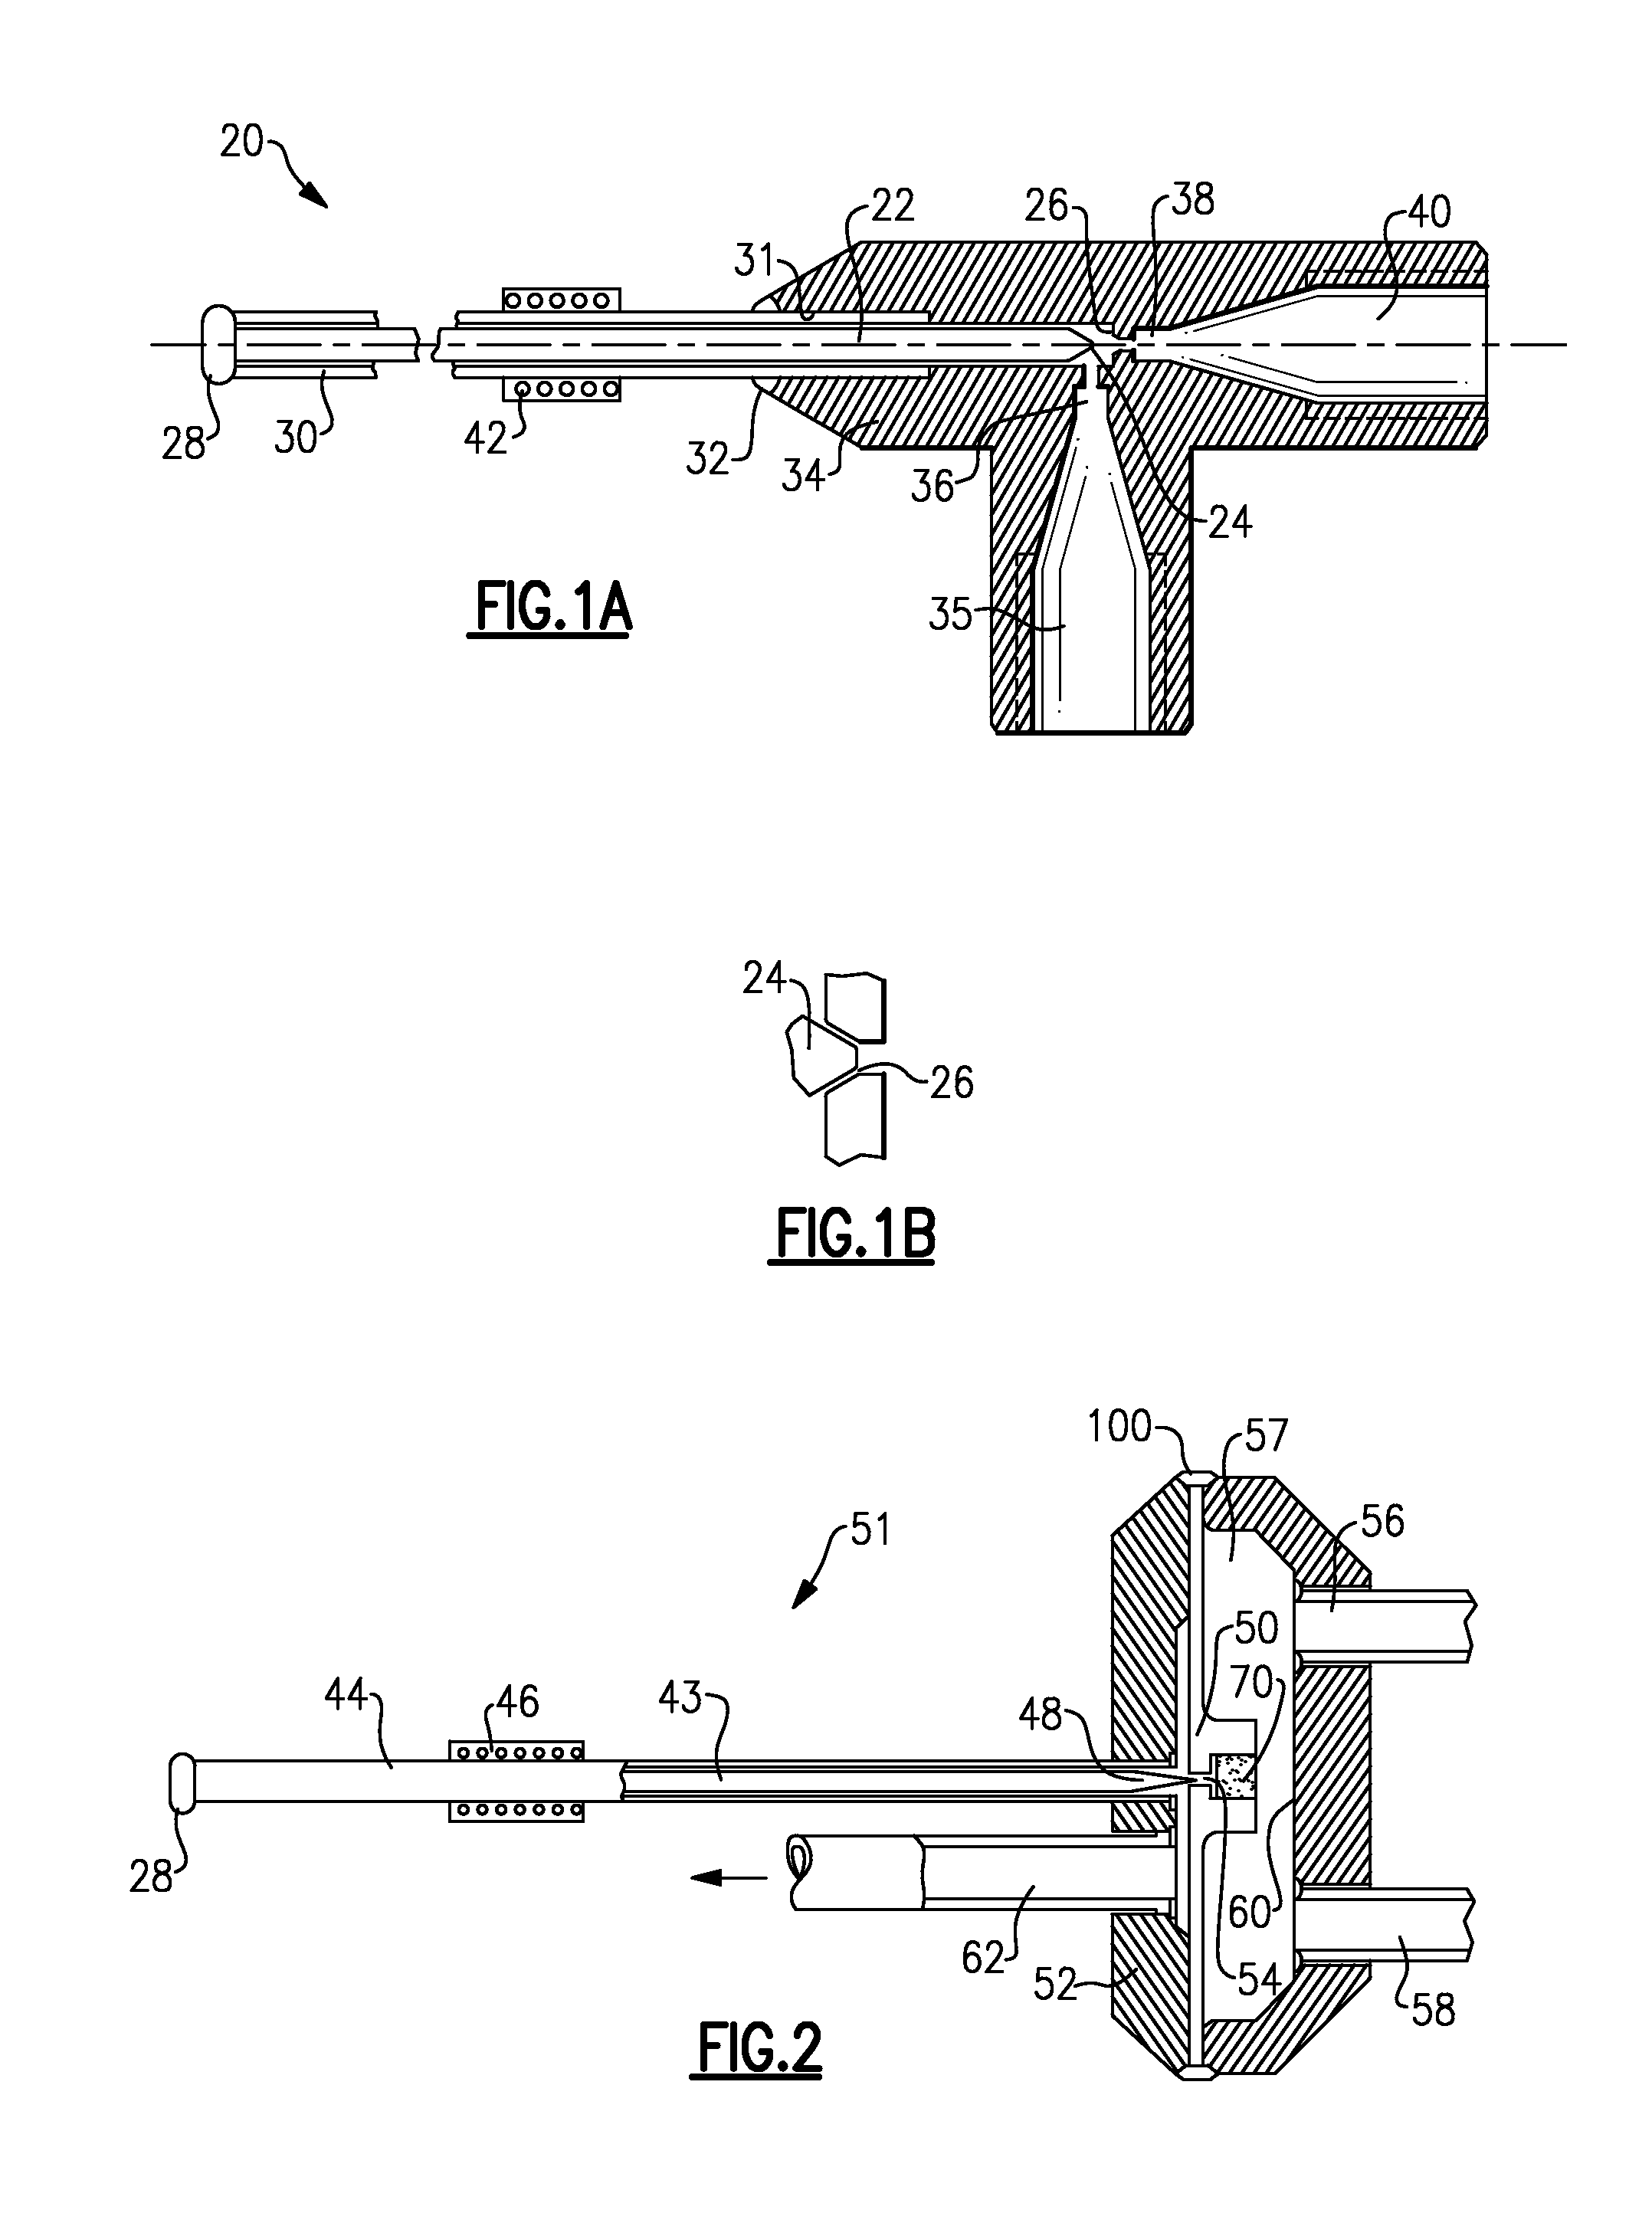 Thermally operated valve